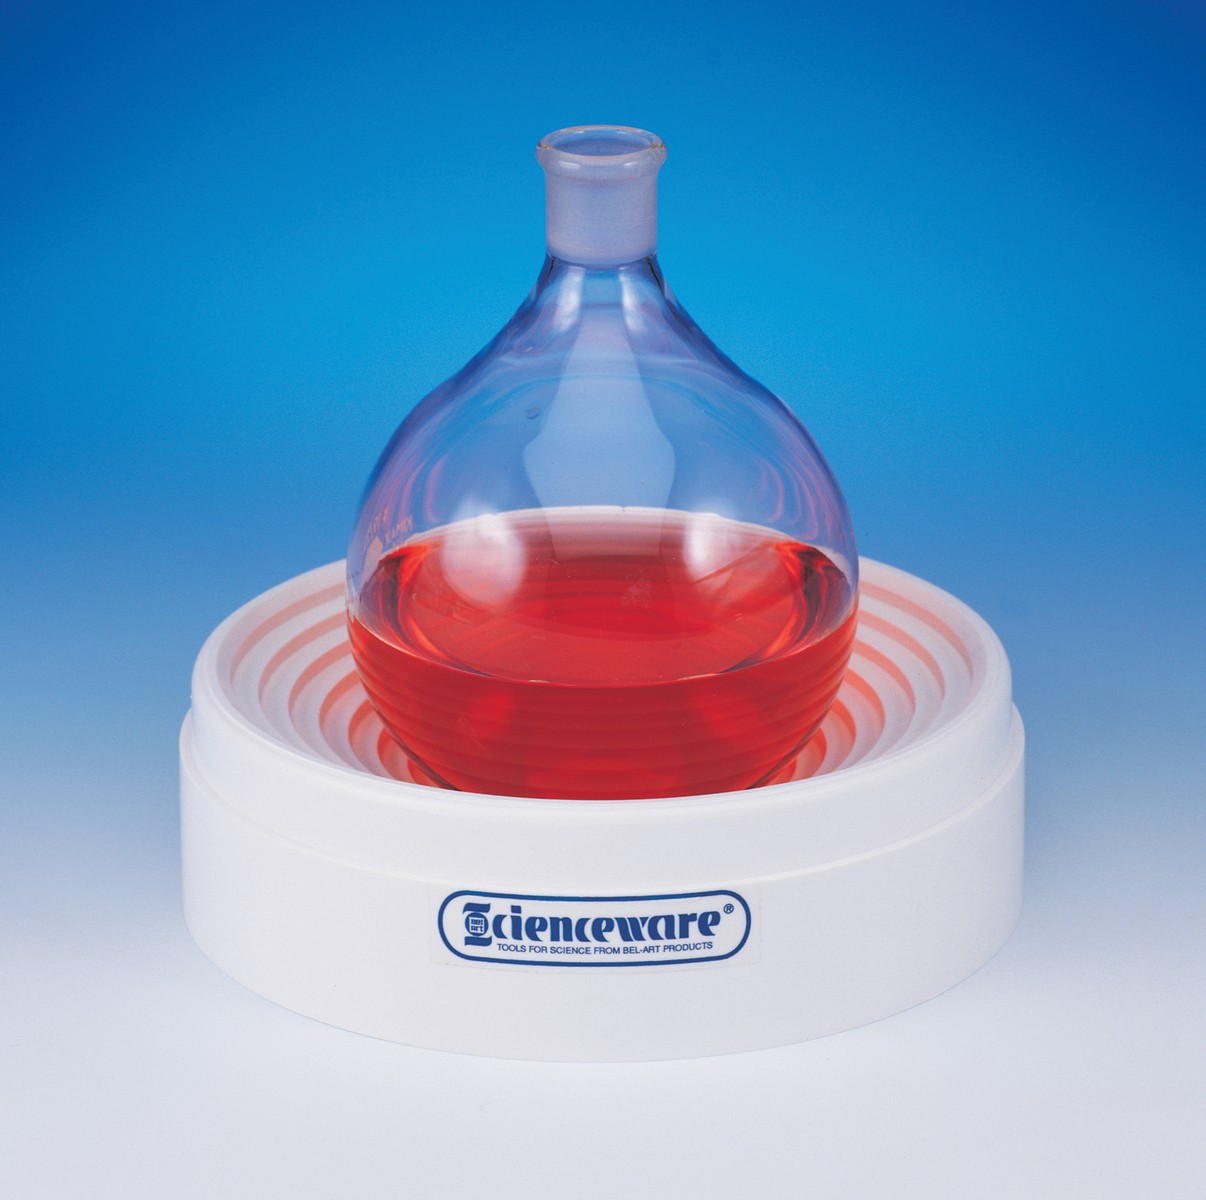 SP Bel-Art Polypropylene Round-Bottom Flask Support; For Flasks up to 10 Liters, 6¾ Diam. x 2 in.H